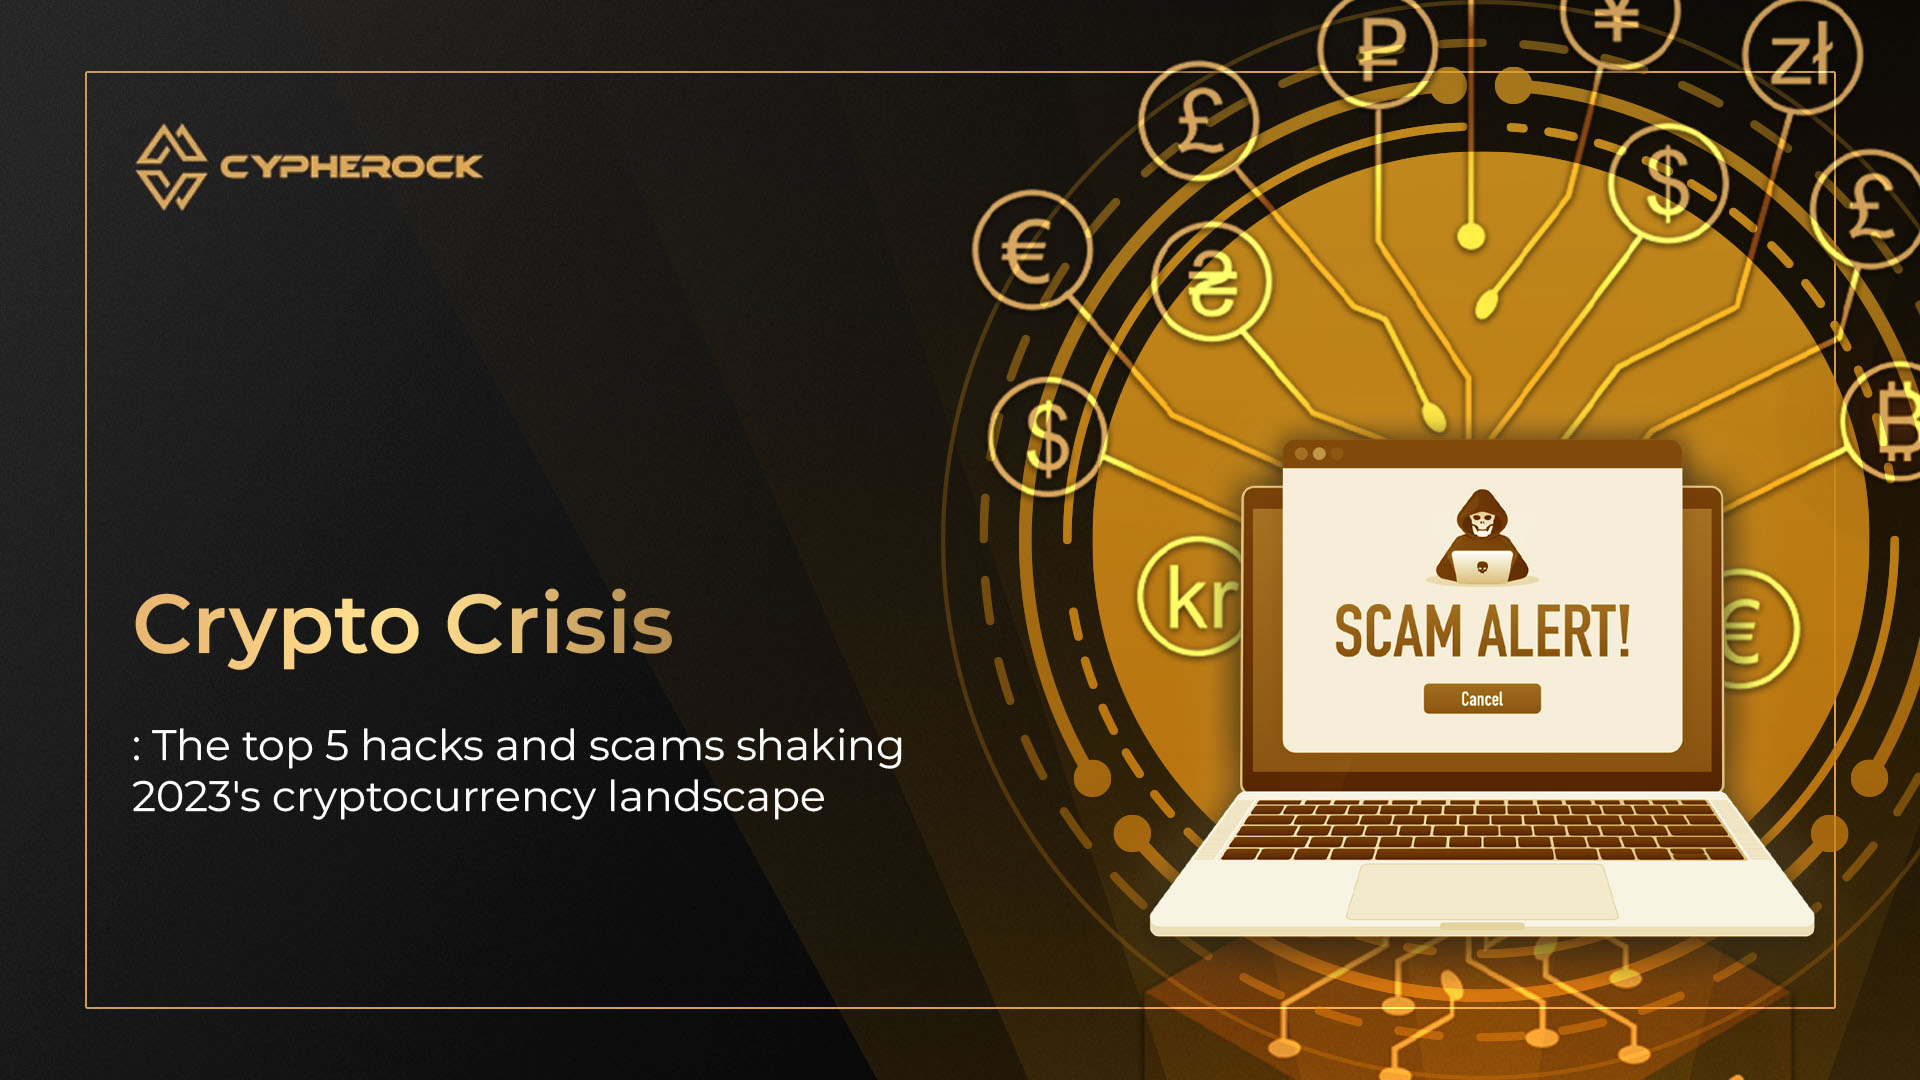 Crypto Crisis: The Top 5 Hacks and Scams Shaking 2023's Cryptocurrency Landscape